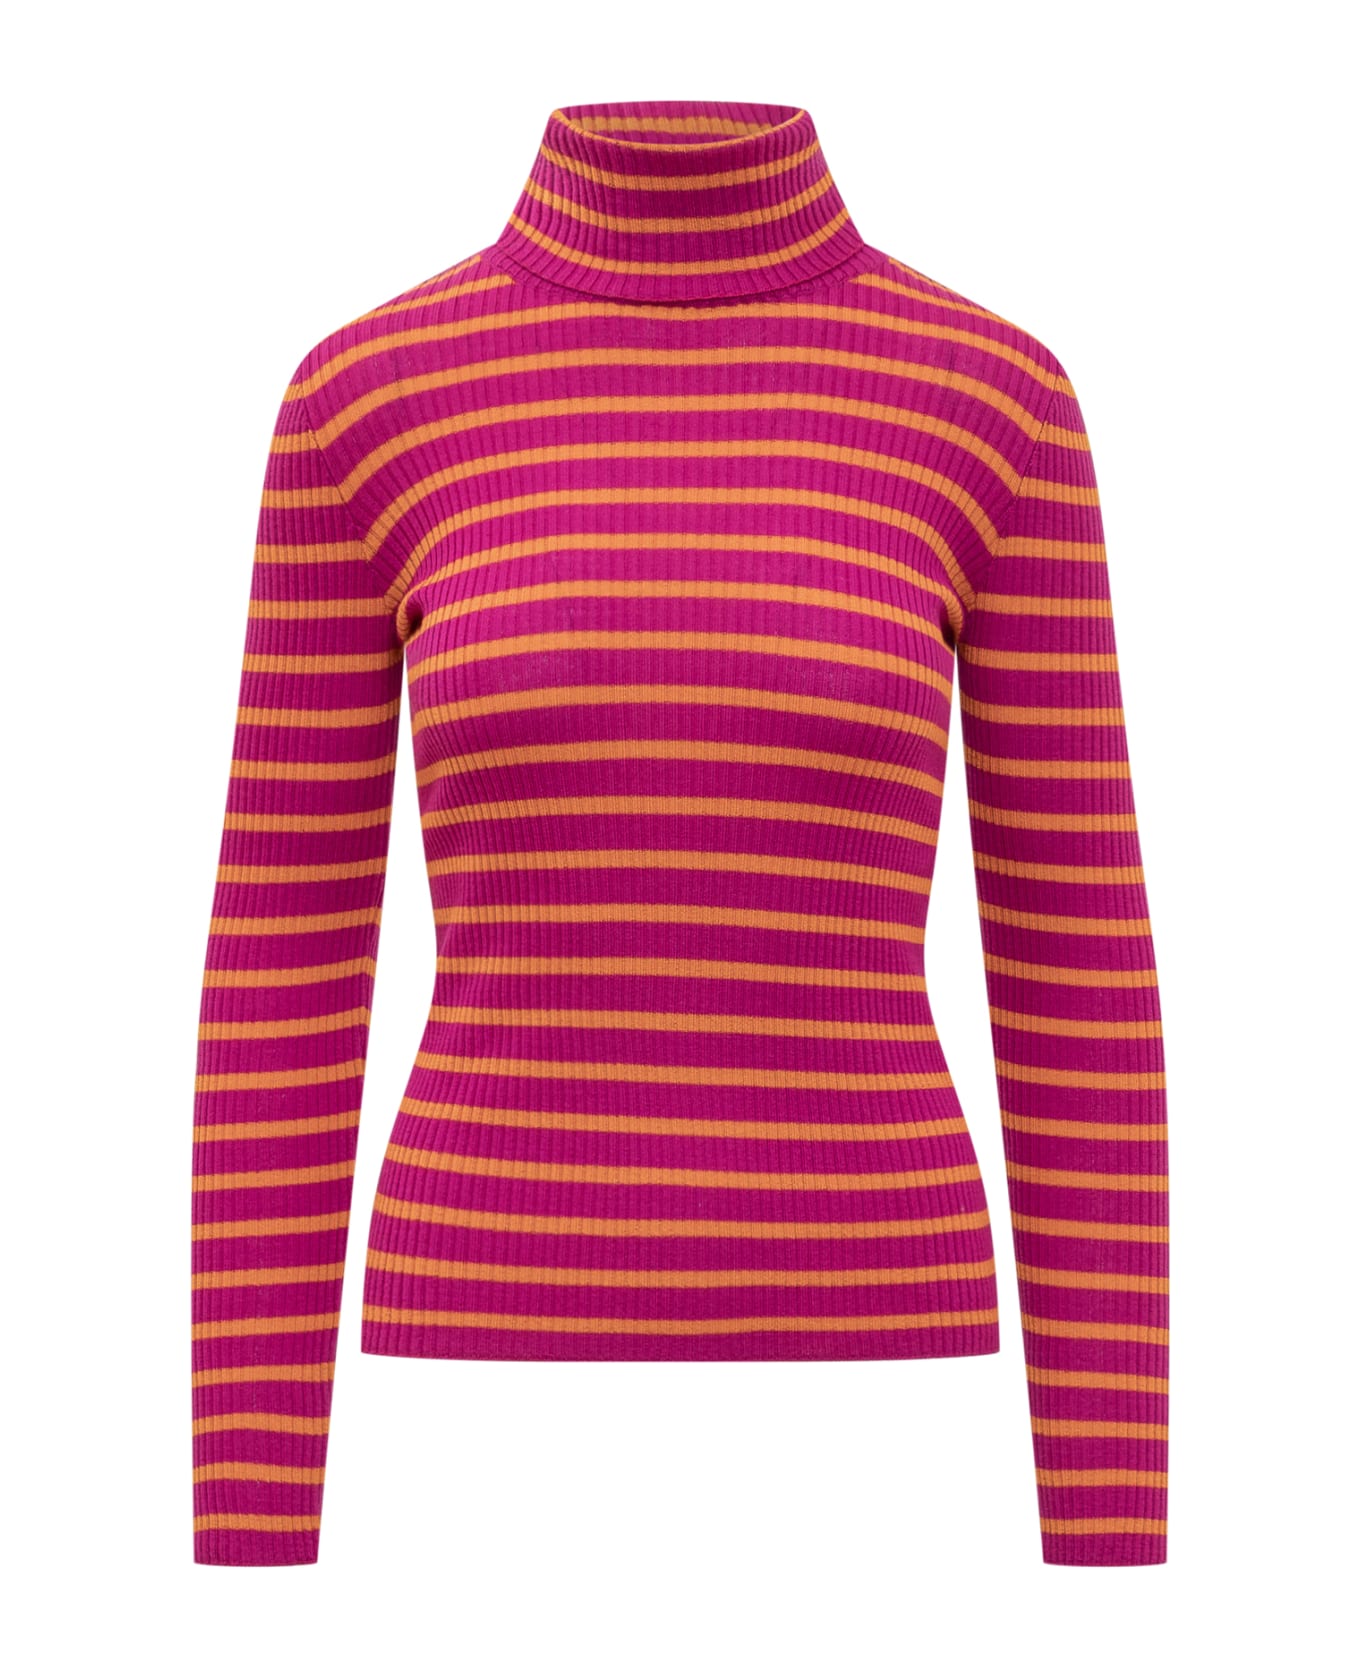 Jucca Ribbed Sweater - AMETISTA ニットウェア